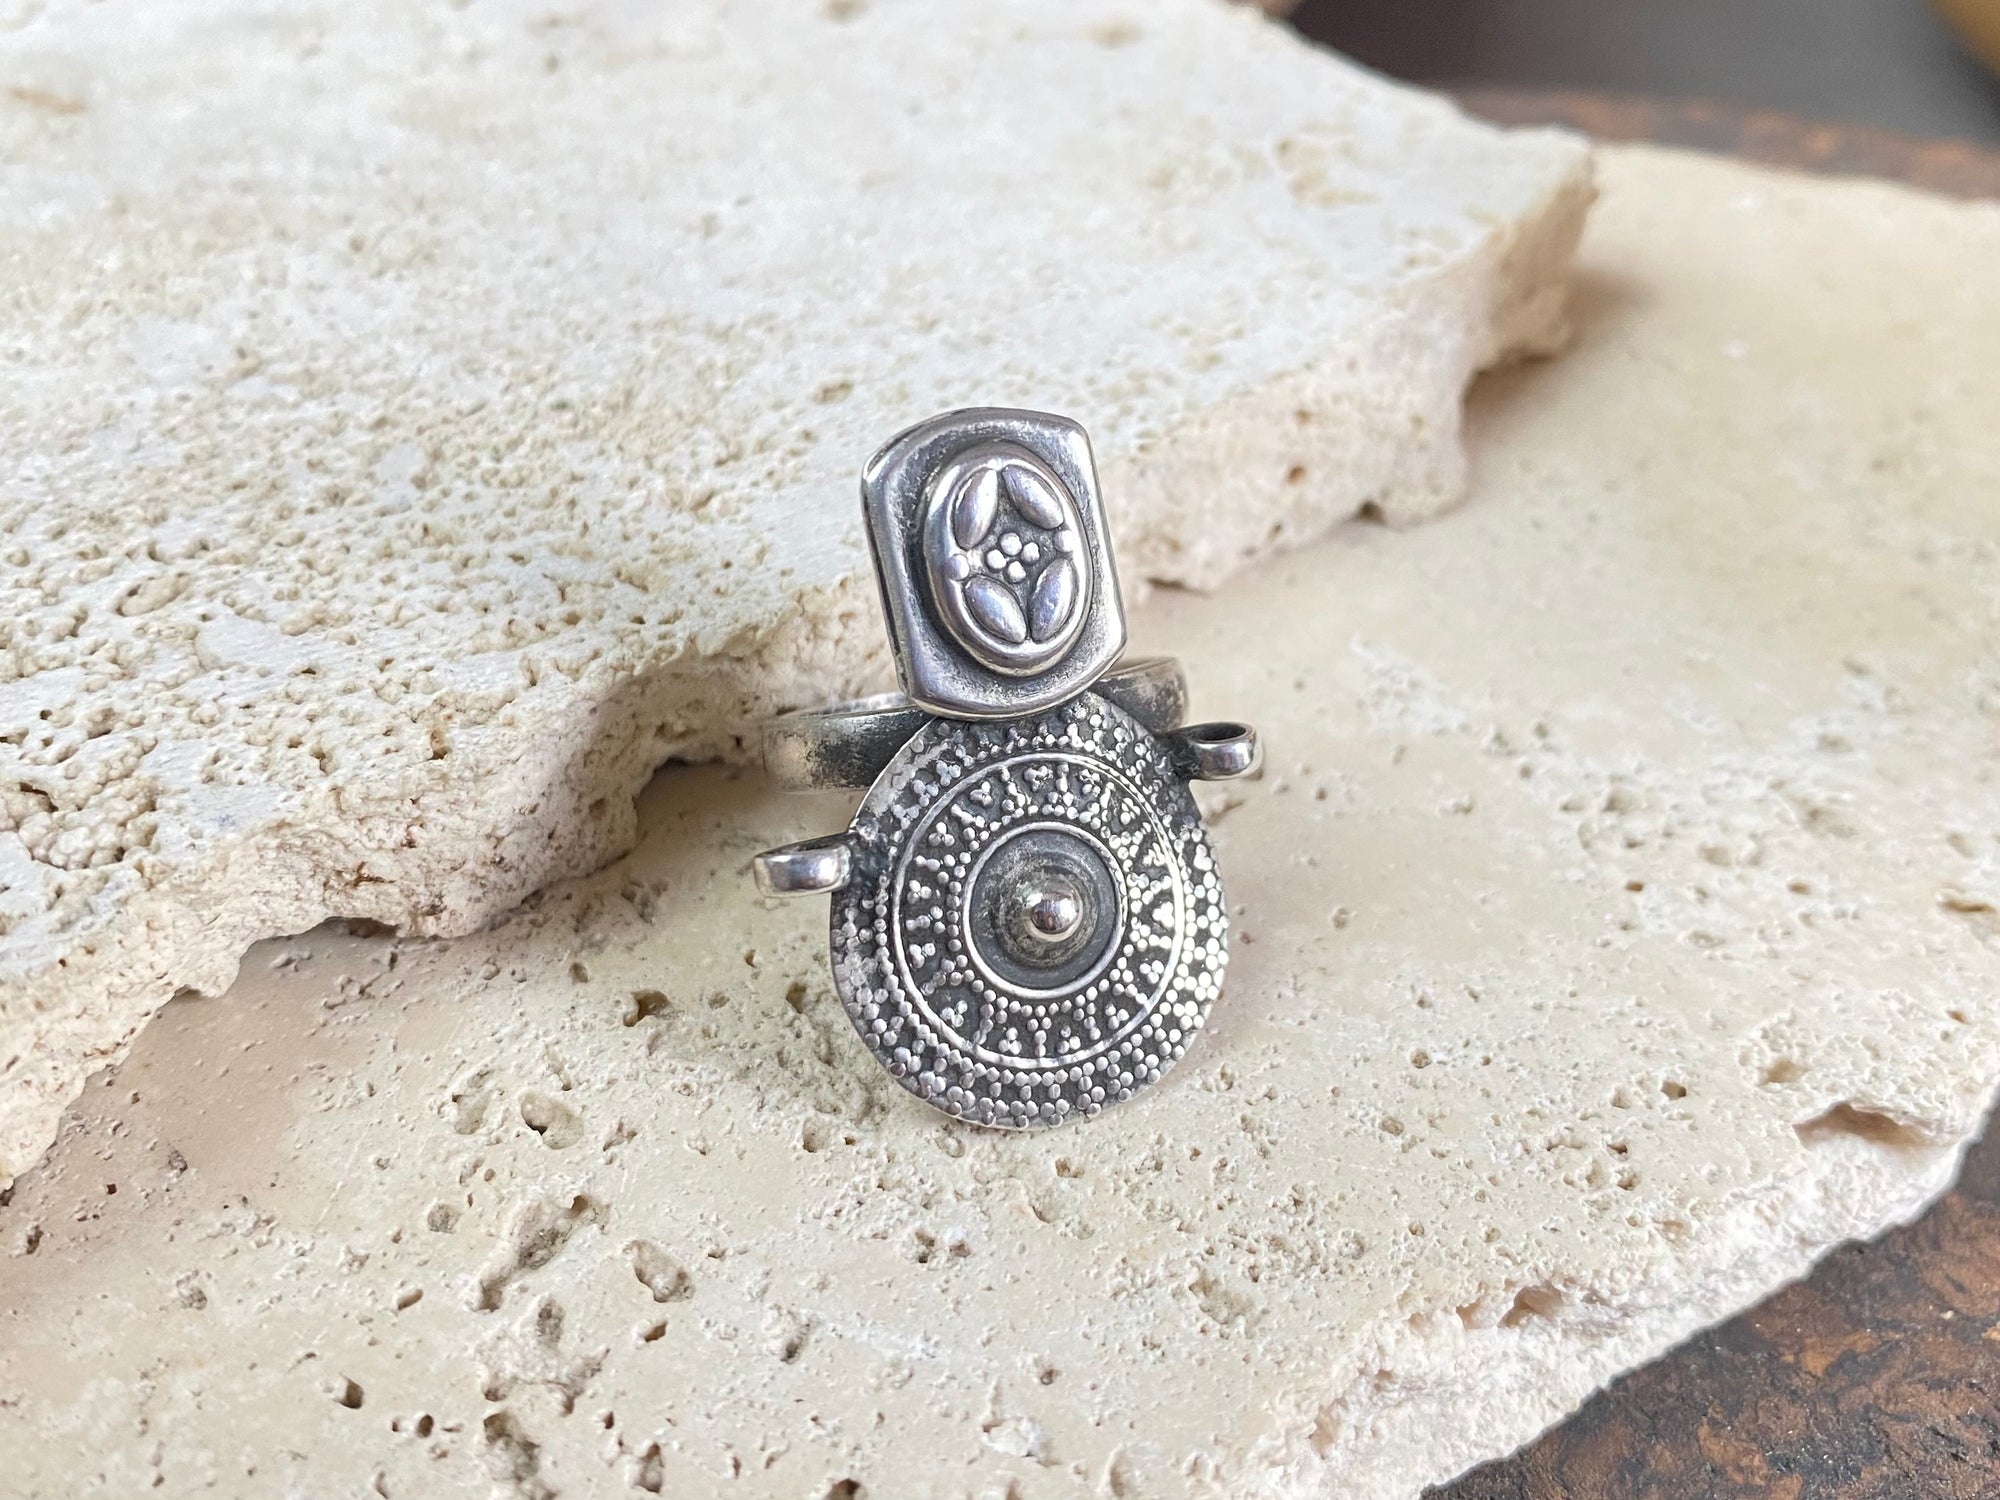 Statement tribal silver ring from regional Rajasthan, India. High grade or sterling silver. Adjustable back so it will fit a number of different finger sizes. Measurements: Ring face: 3.4 x 2.6 cm Size: Anywhere from size 6 to size 8, this ring is adjustable